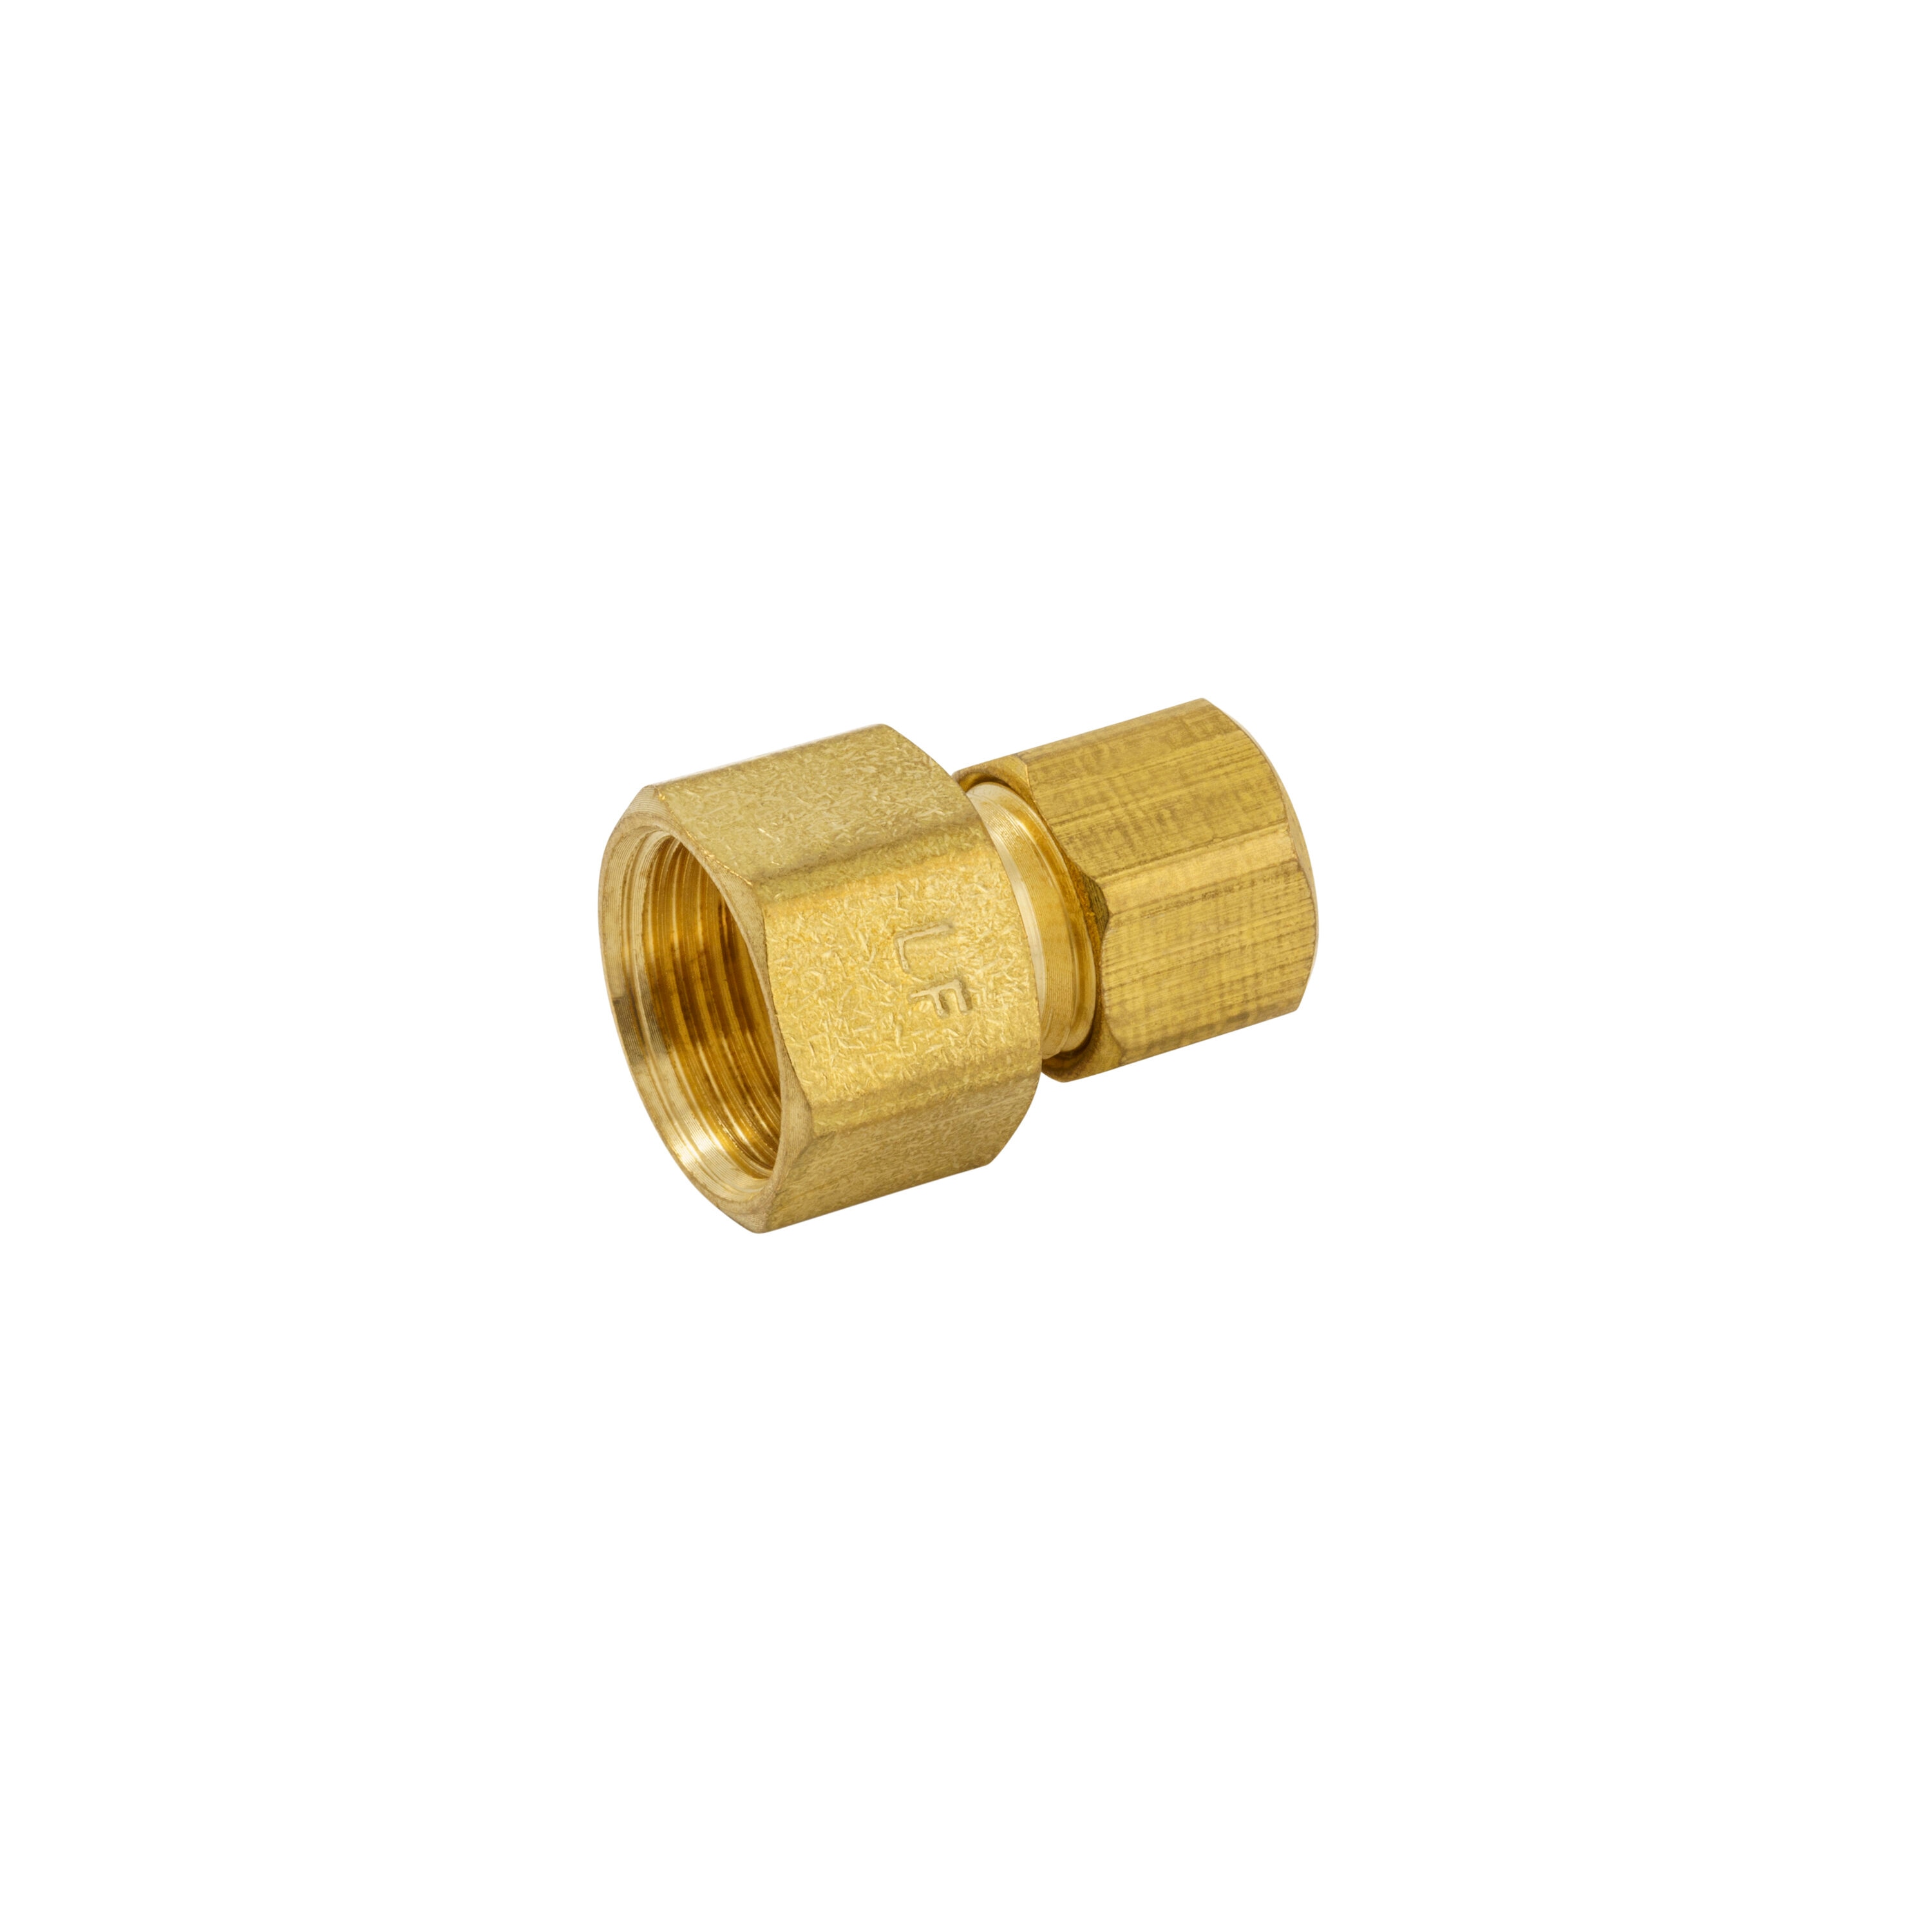 Proline Series 3/8-in x 1/4-in Compression Reducing Union Fitting